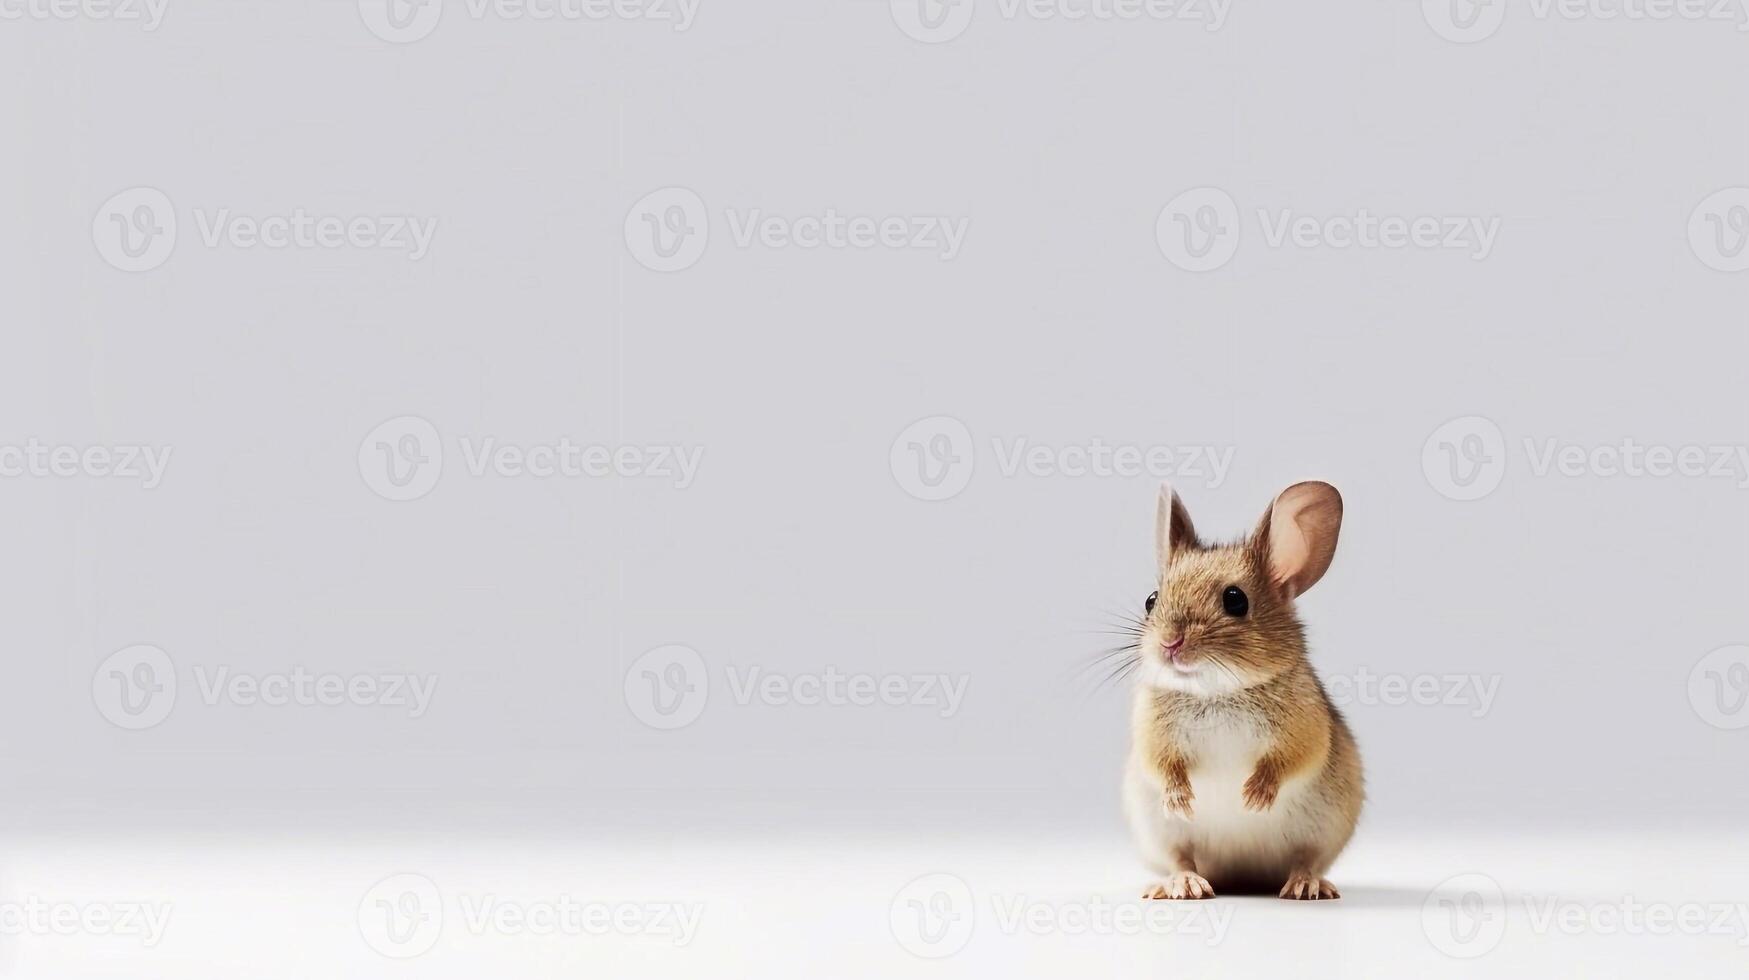 A hamster sits on a table with a white background - photo